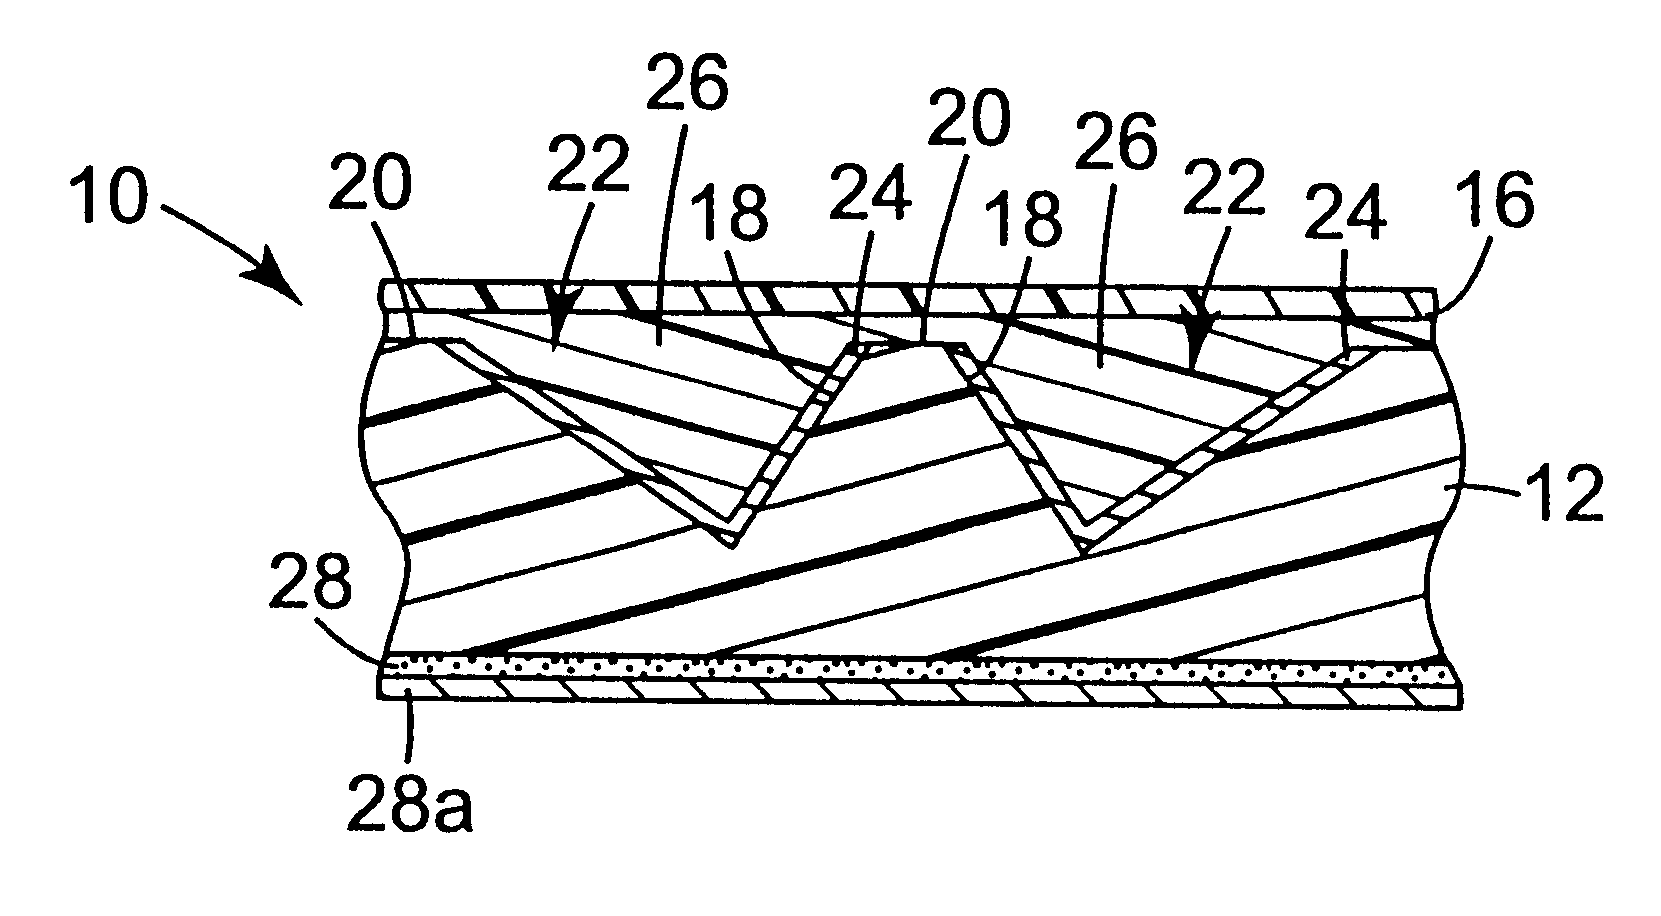 Cube corner cavity based retroeflectors with transparent fill material